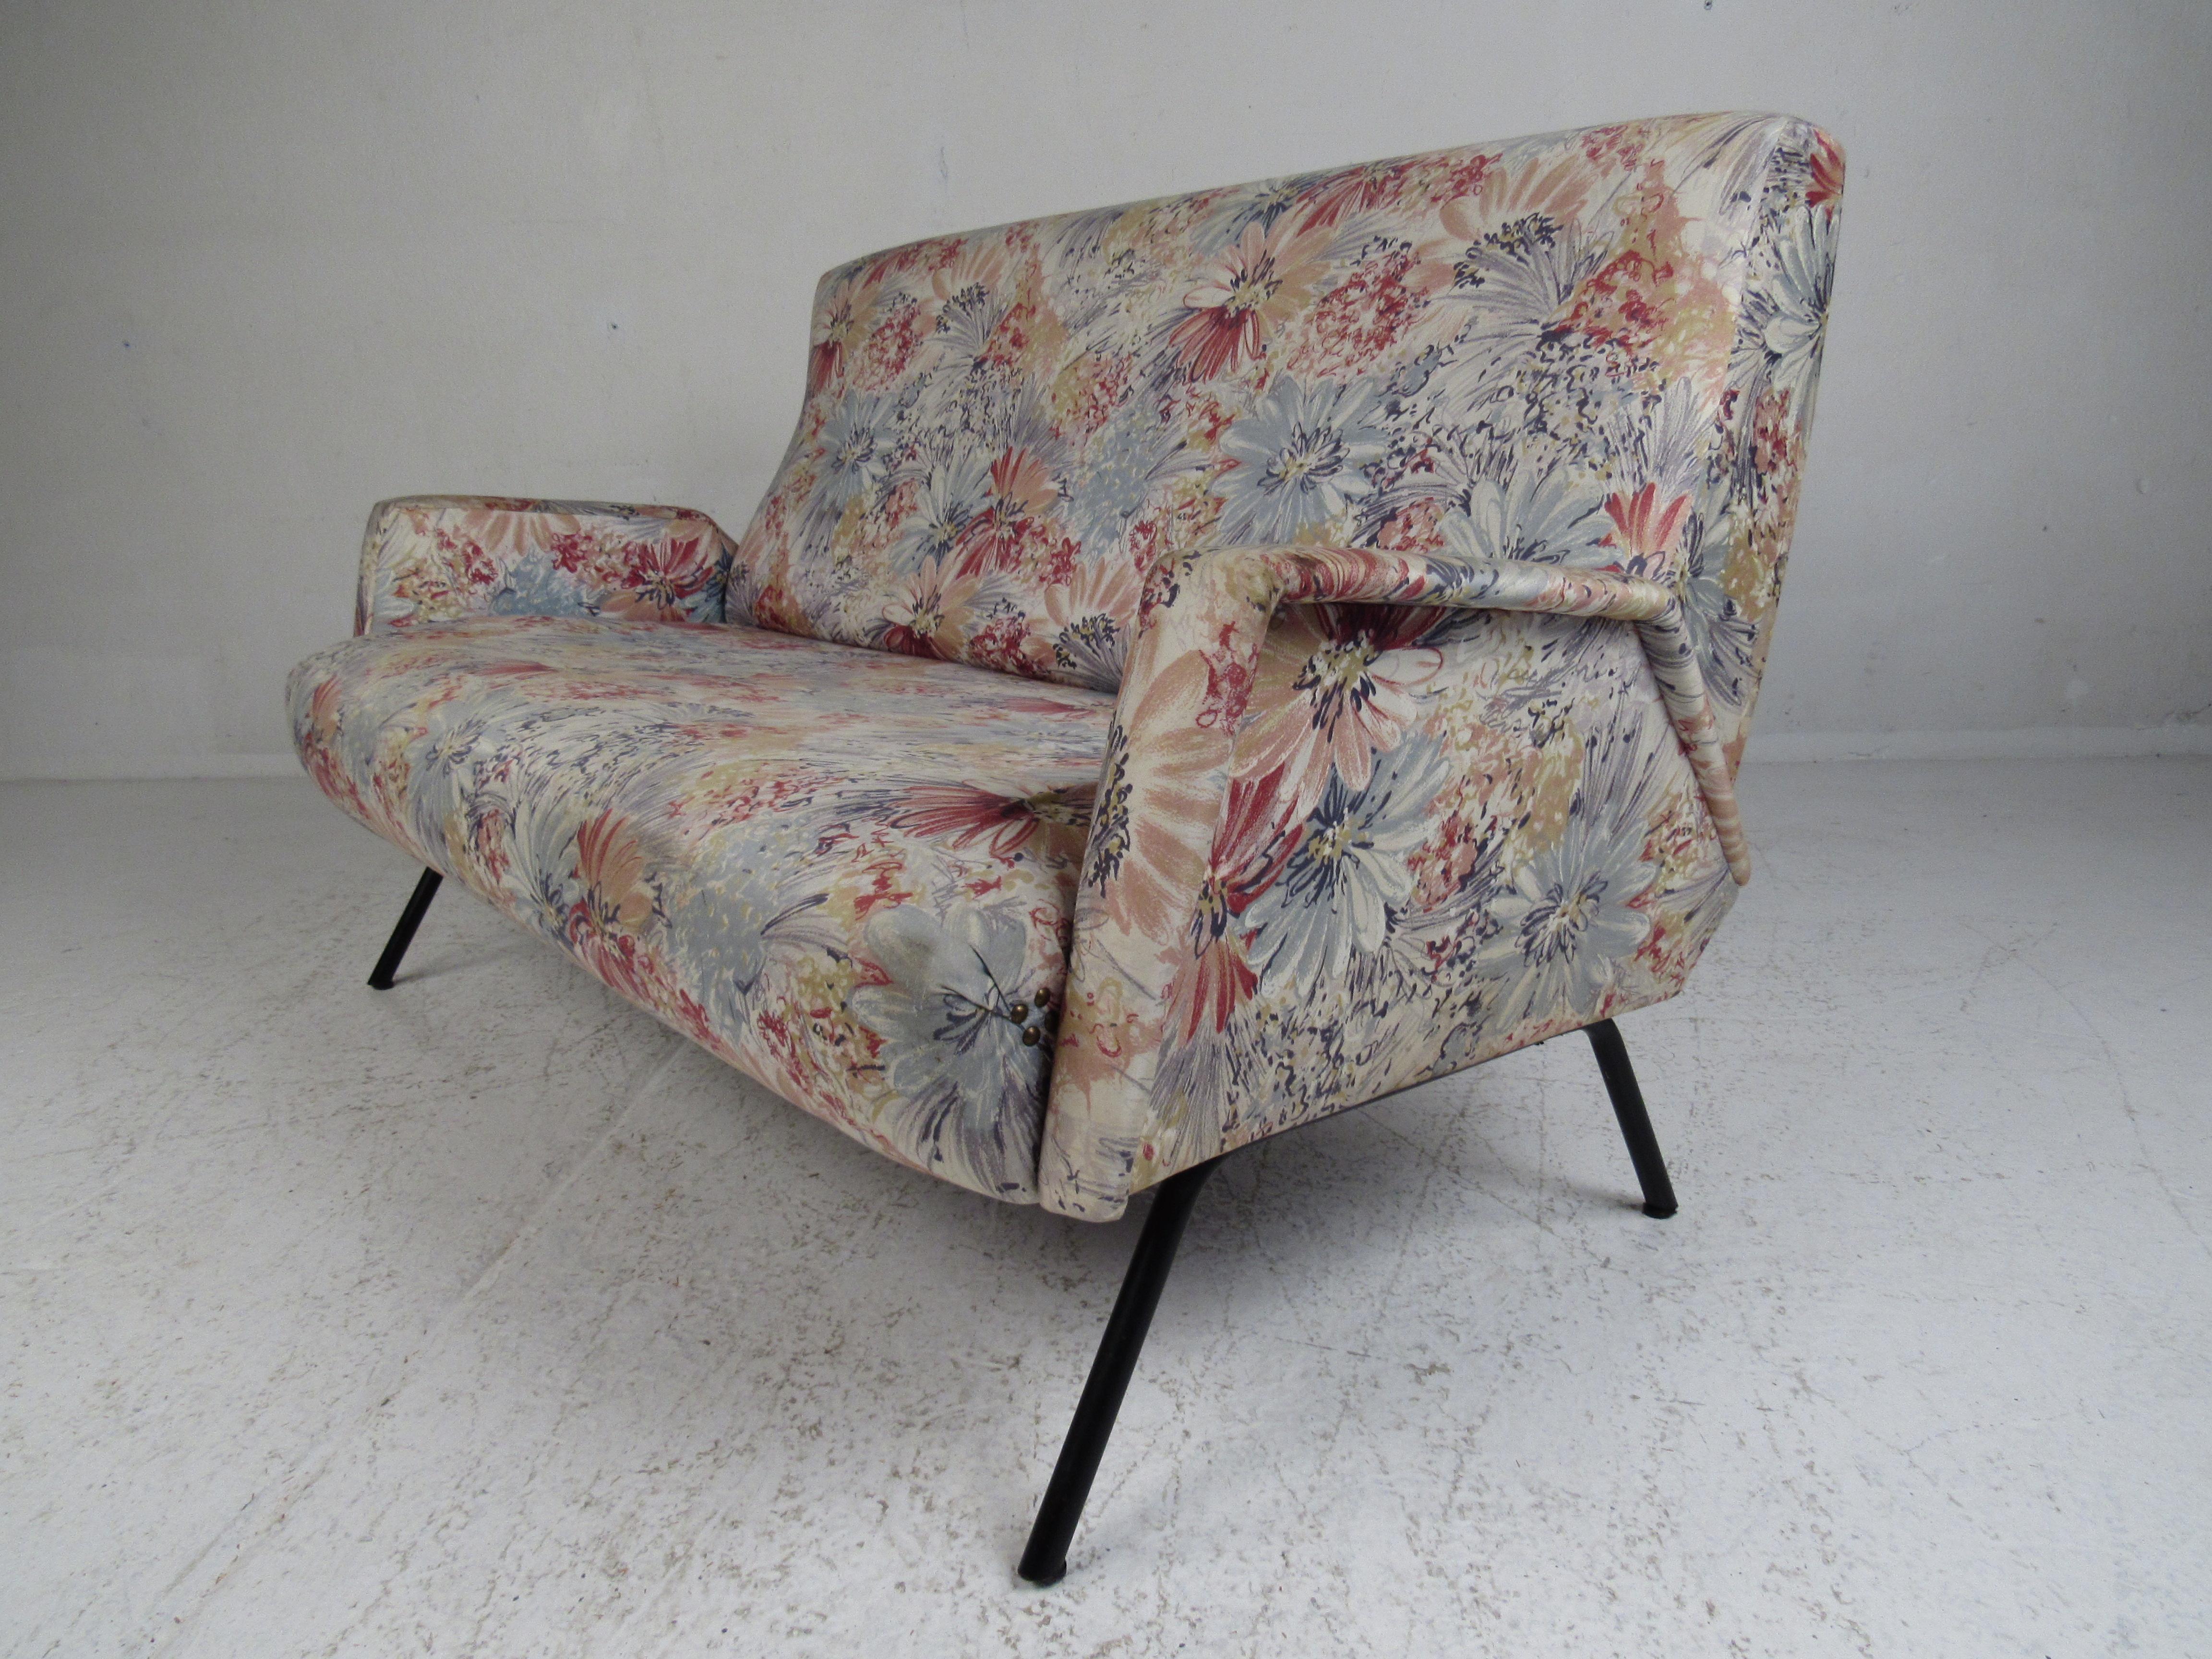 Italian Mid-Century Modern Settee In Good Condition For Sale In Brooklyn, NY